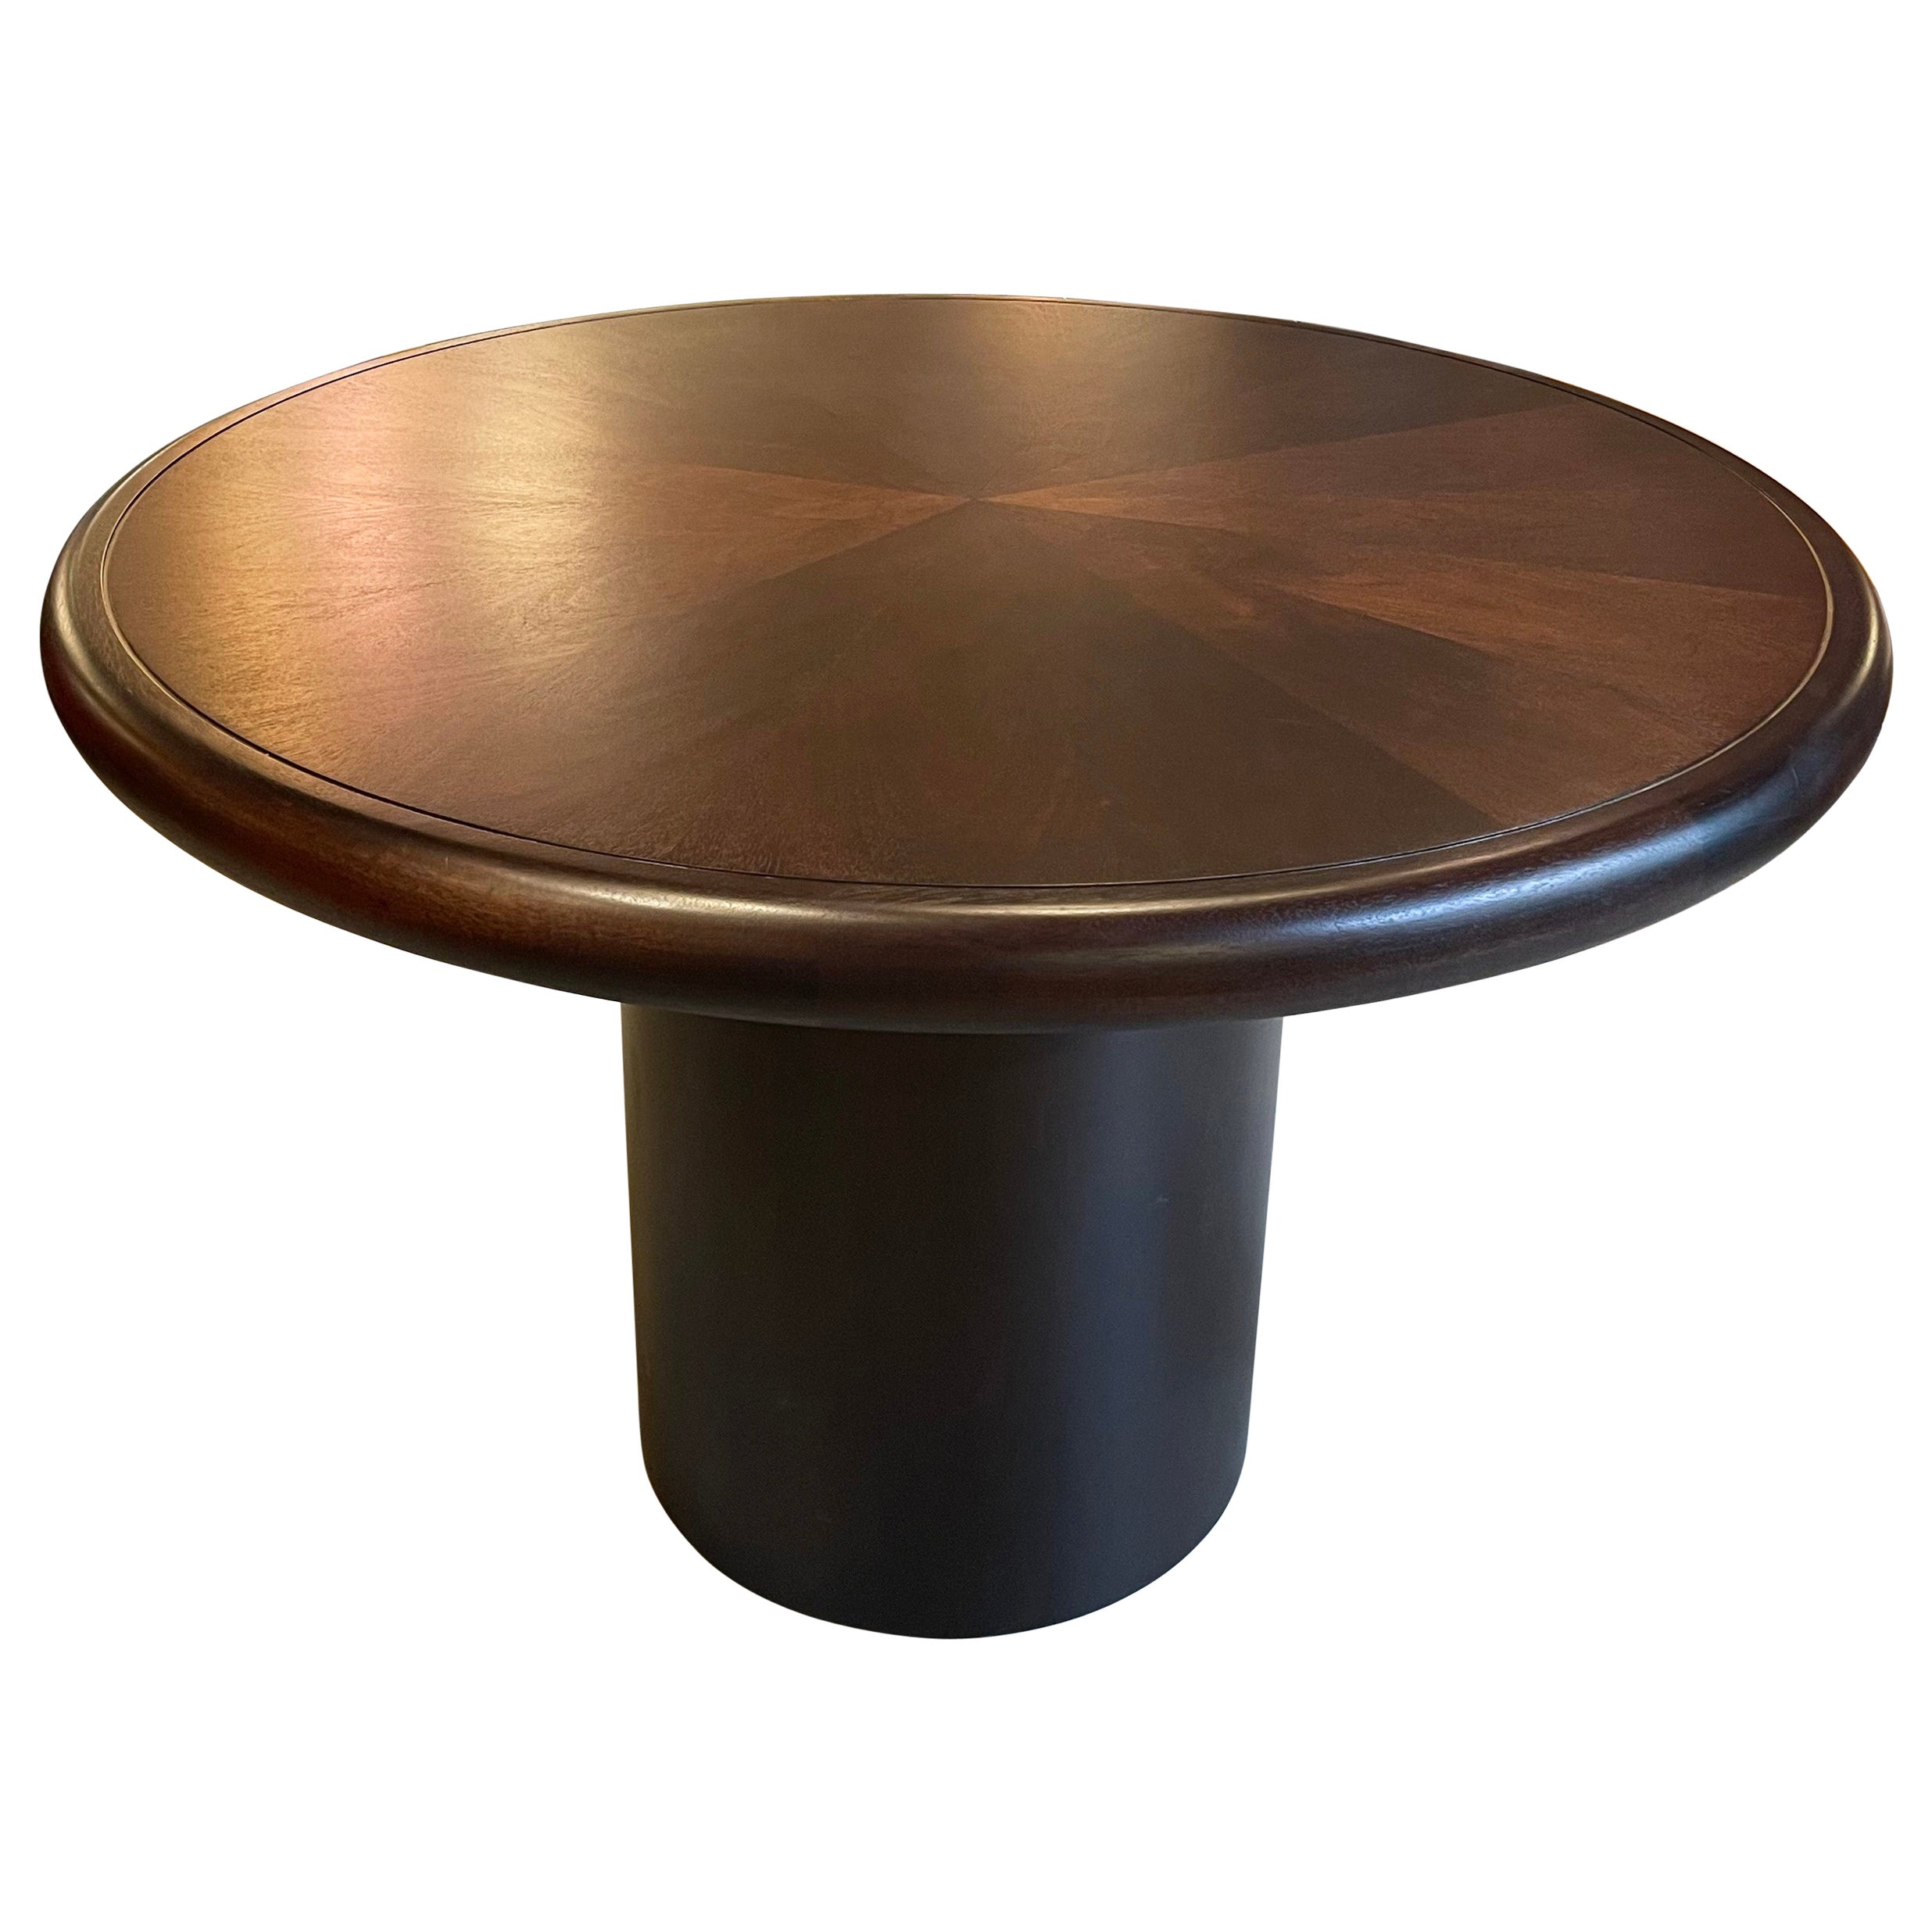 Round Bookmatched Rosewood Pedestal Dining Table By Edward Wormley For Dunbar For Sale